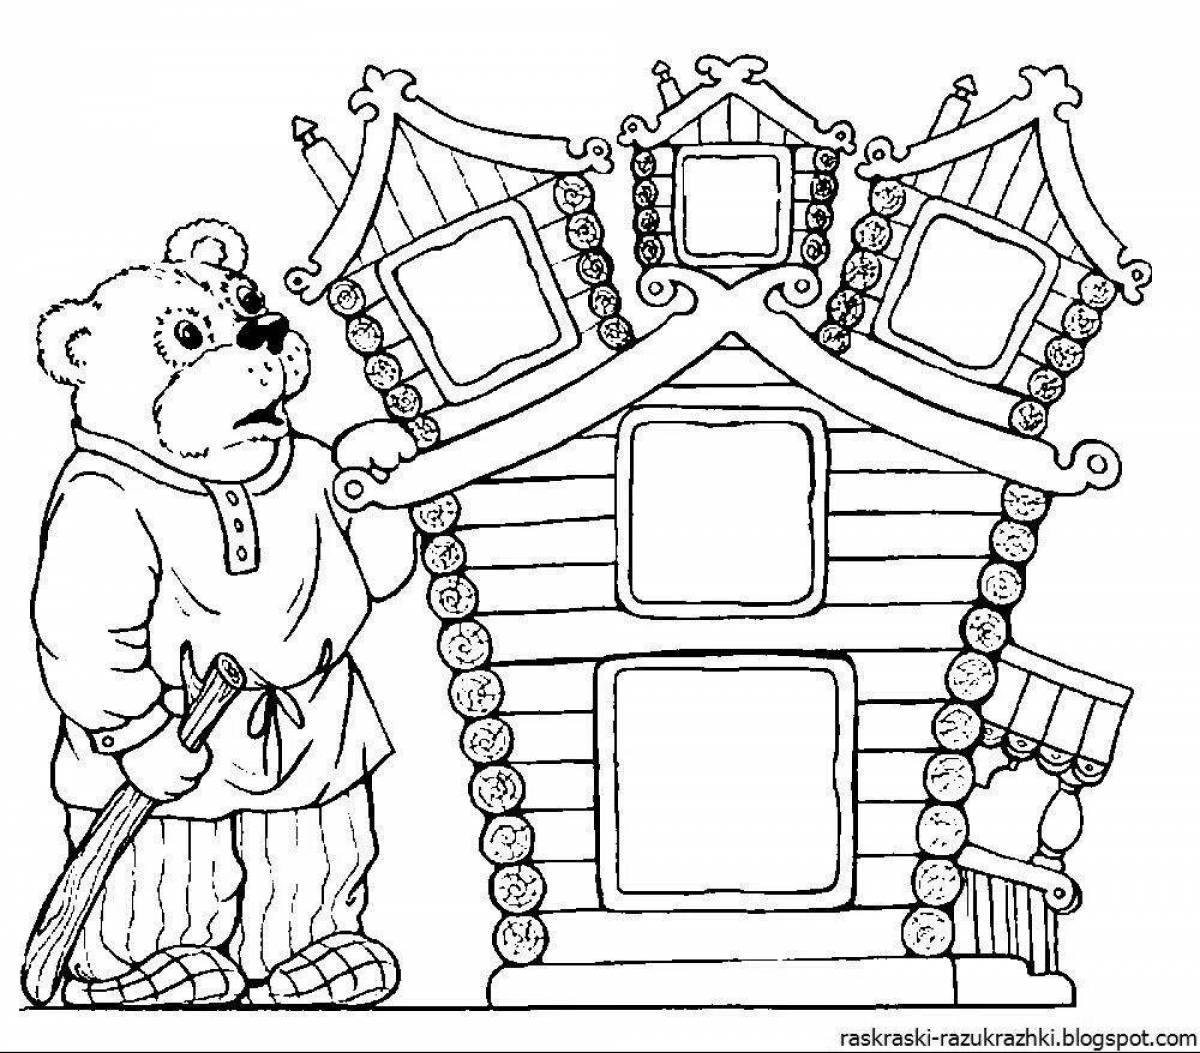 Visionary coloring page visiting a fairy tale